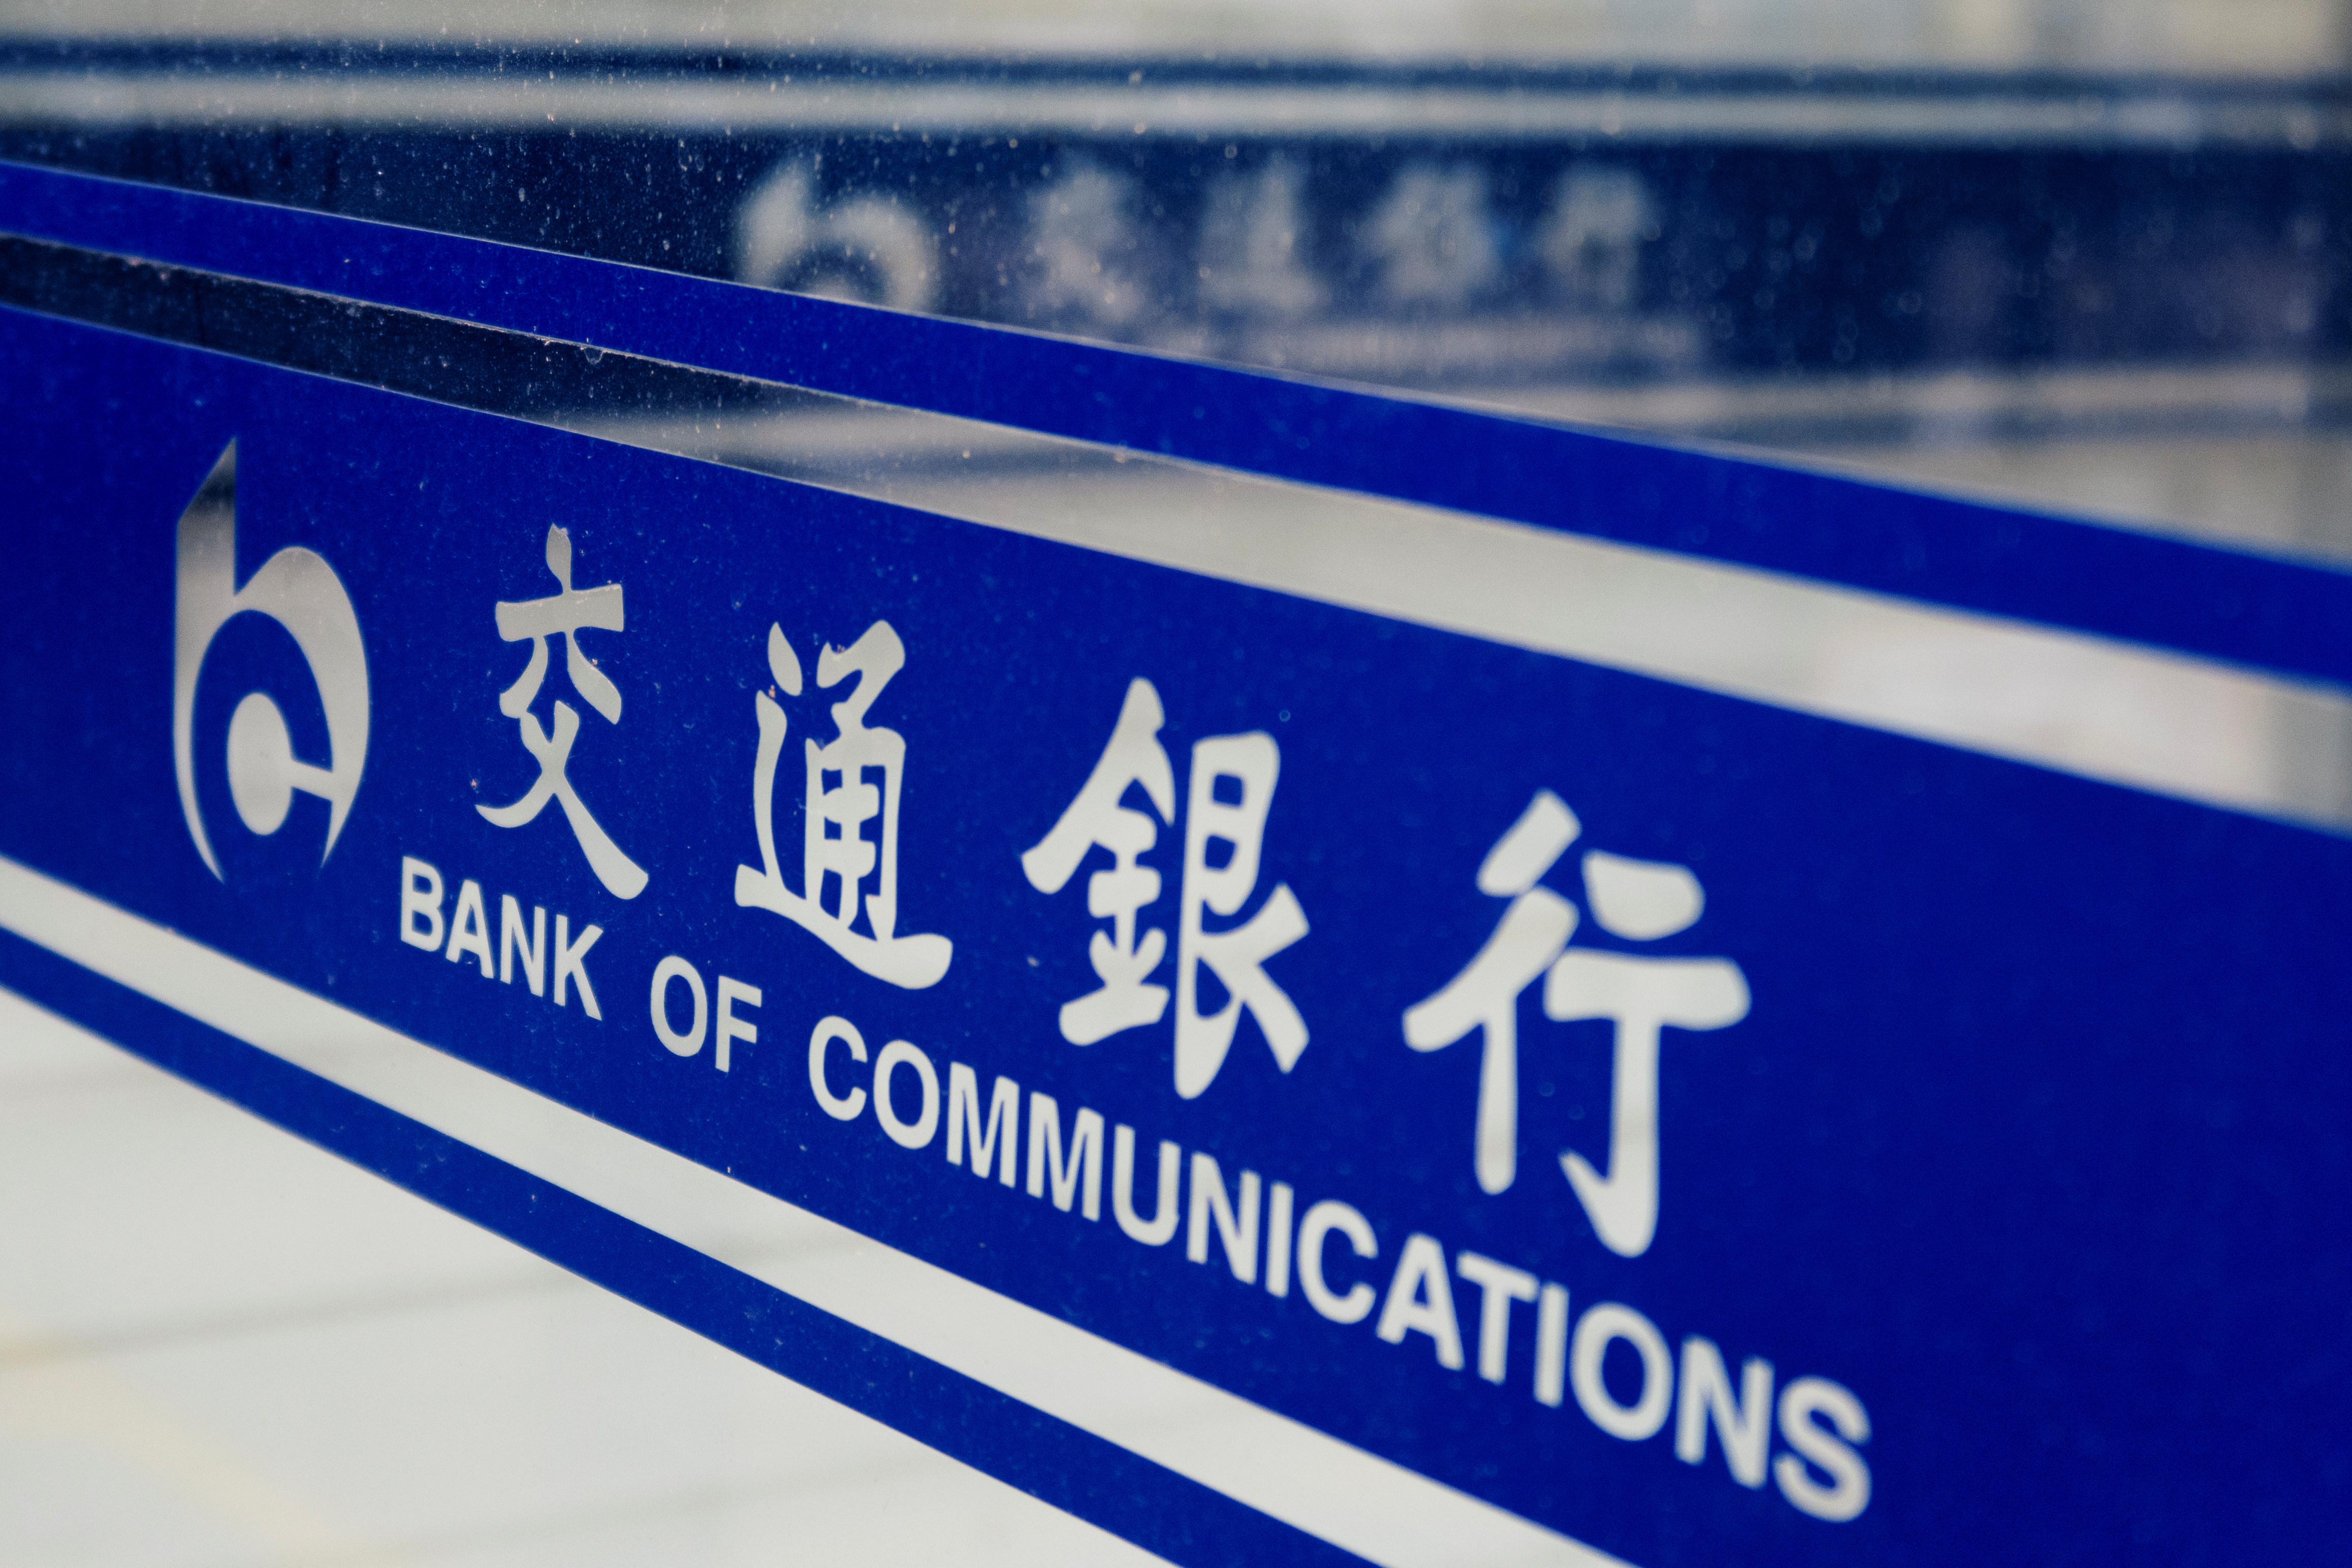 The company logo is seen at an office of Bank of Communications in Beijing